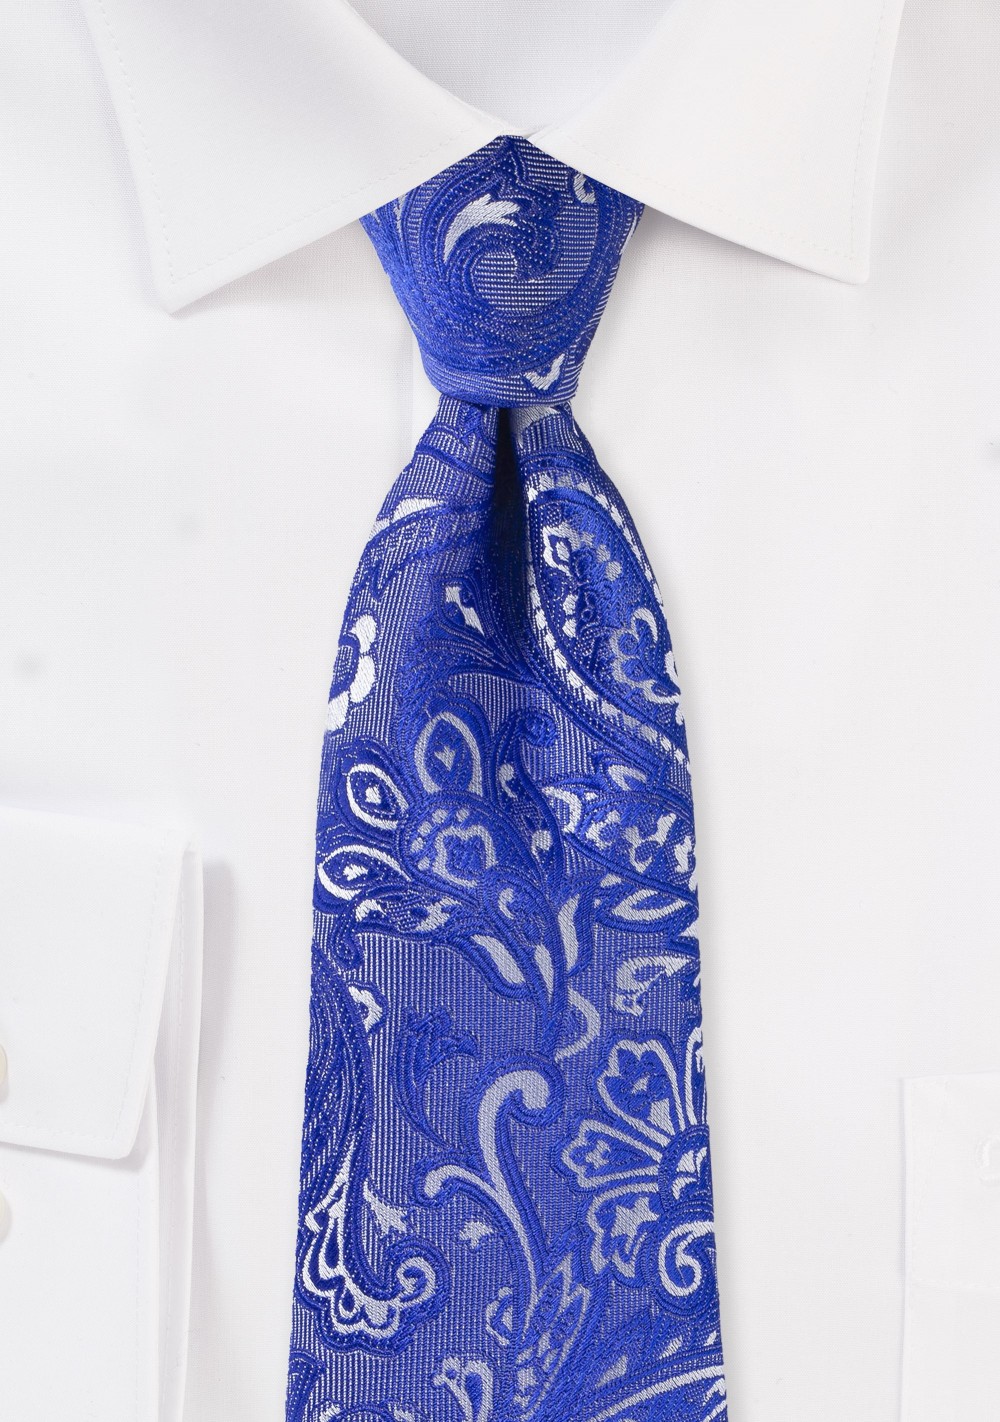 XL Paisley Tie in Morninglory Blue